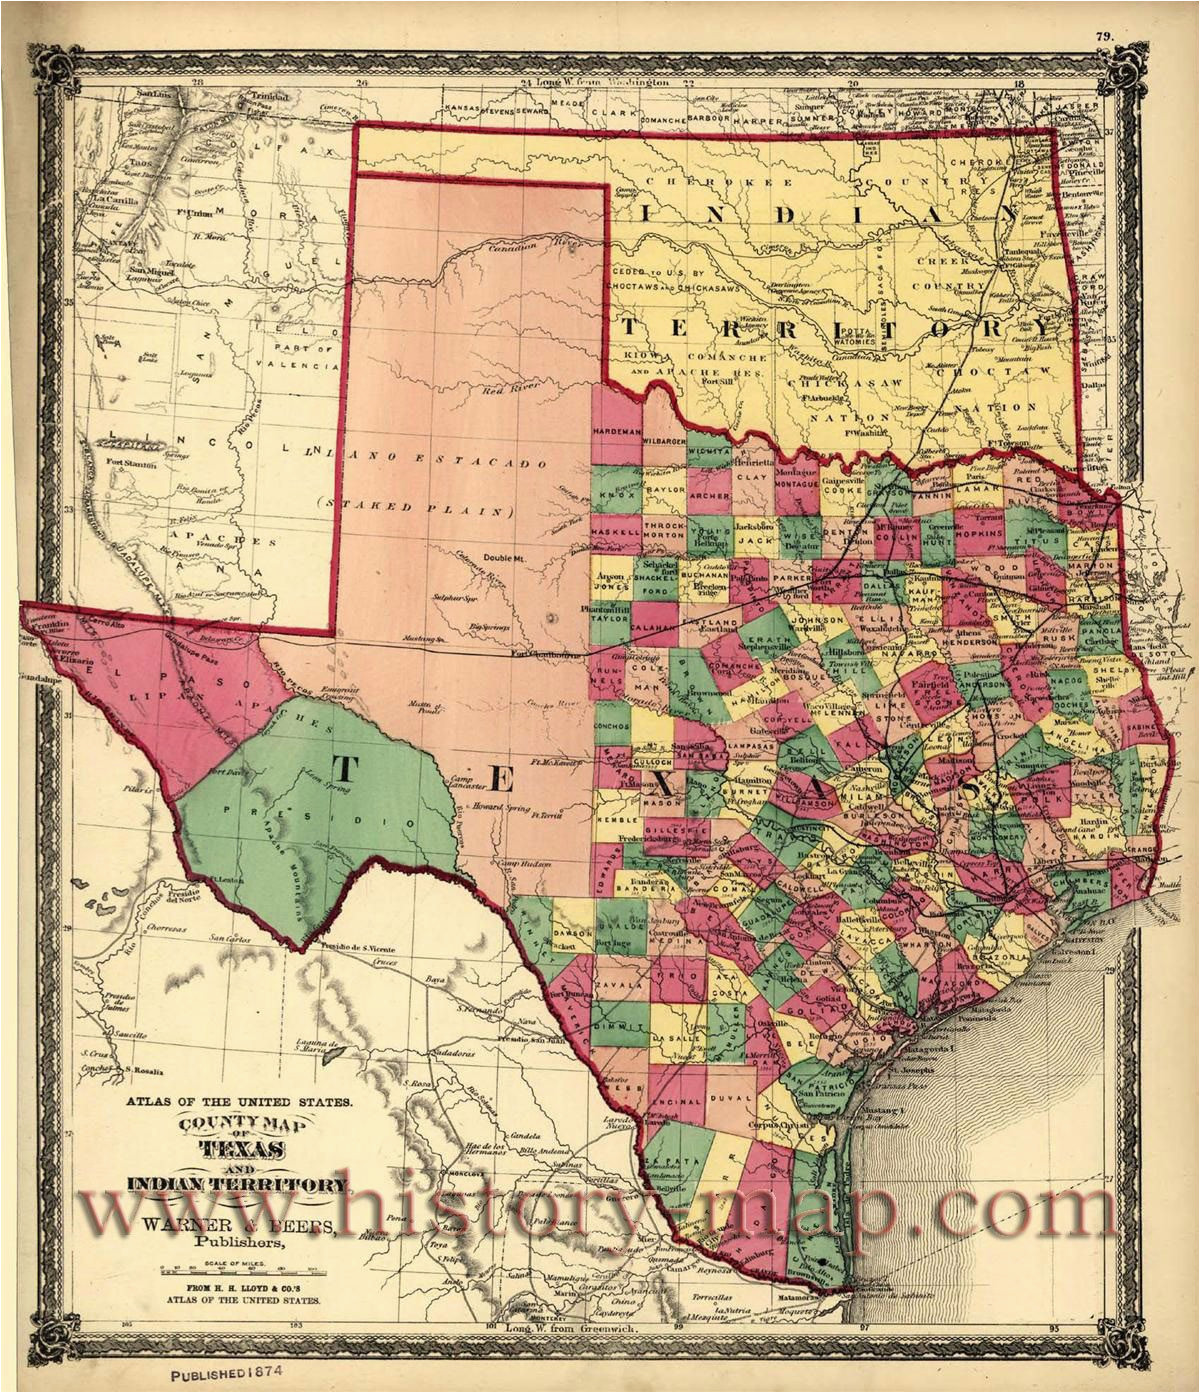 Map Of Counties In Texas Texas Counties Map Published 1874 Maps Texas County Map Texas